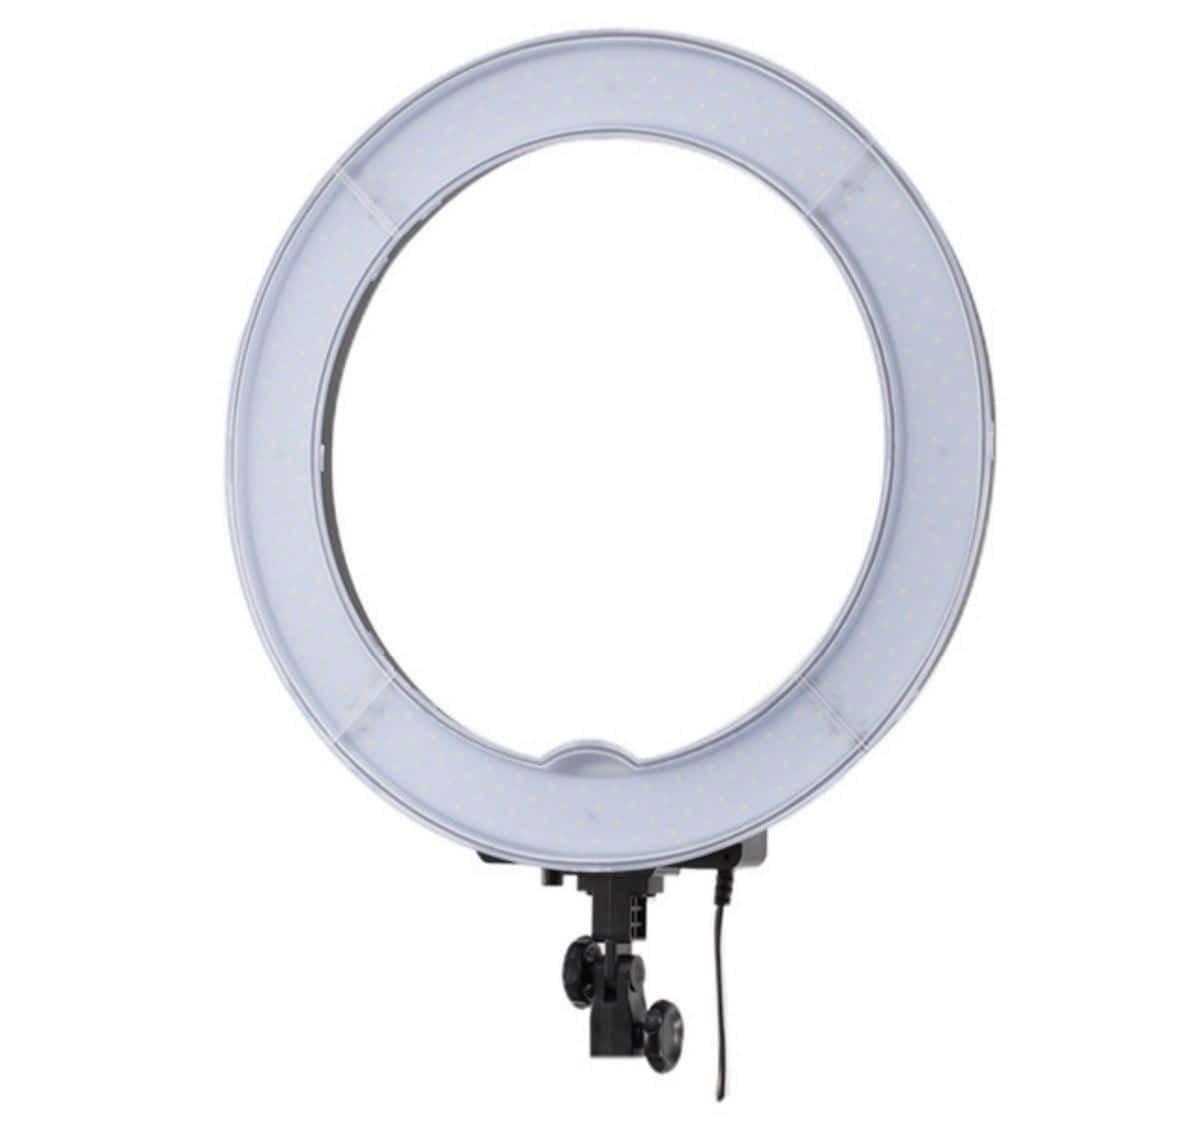 A Ring Light With A White Background